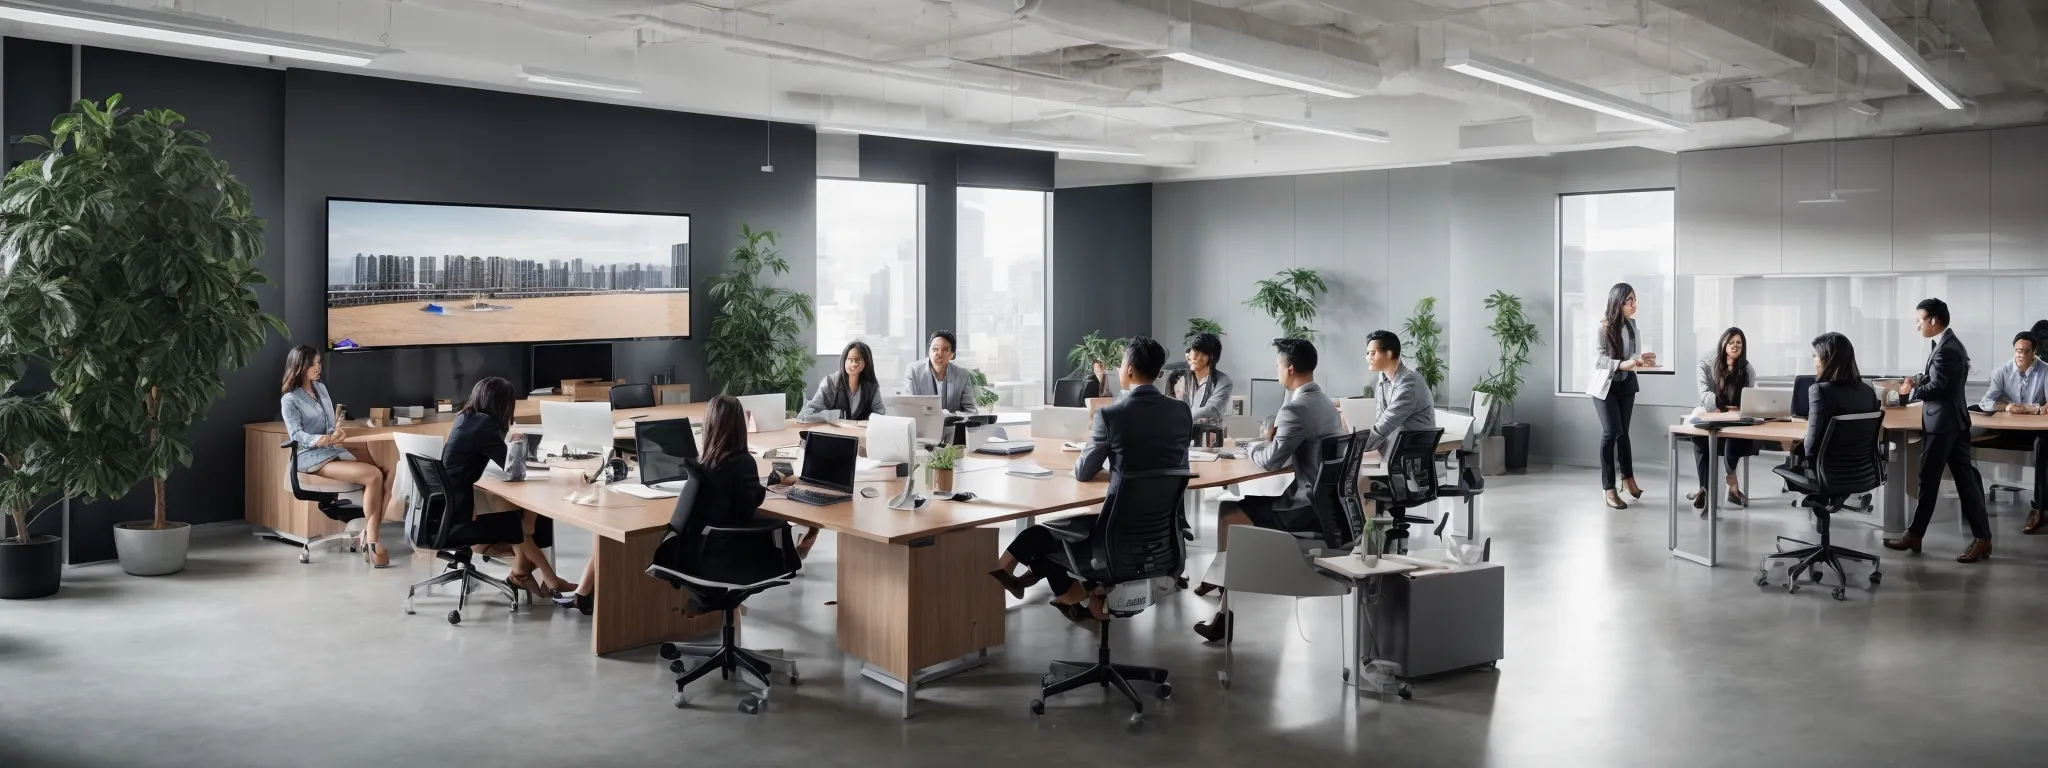 a panoramic view of a sleek, modern office space with a diverse team engaged in a collaborative planning session around a large, digital interactive whiteboard.